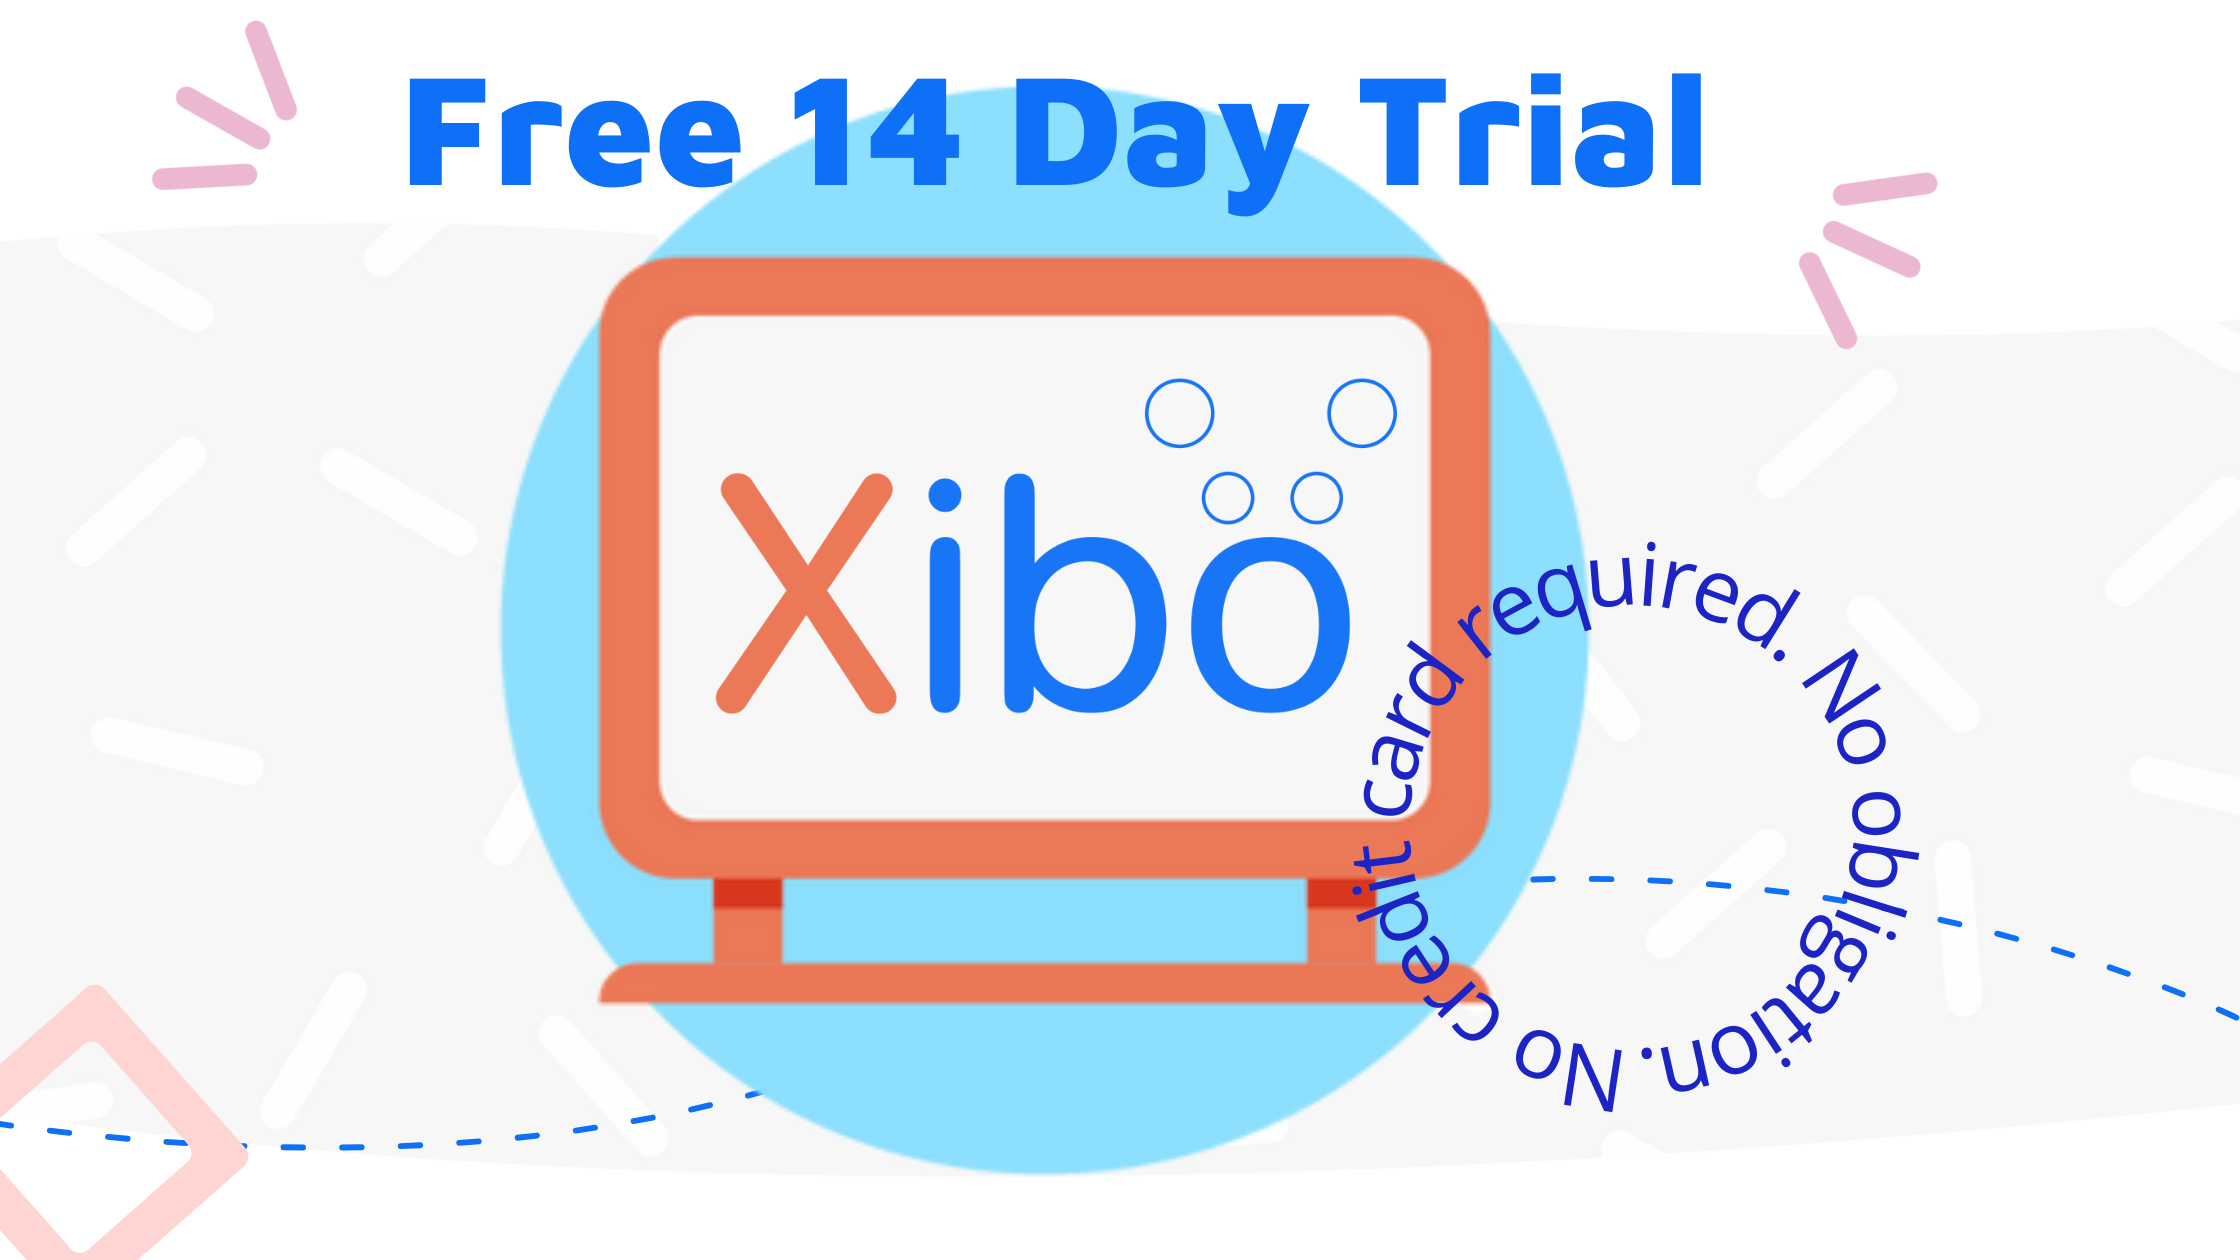 14-Day Trial